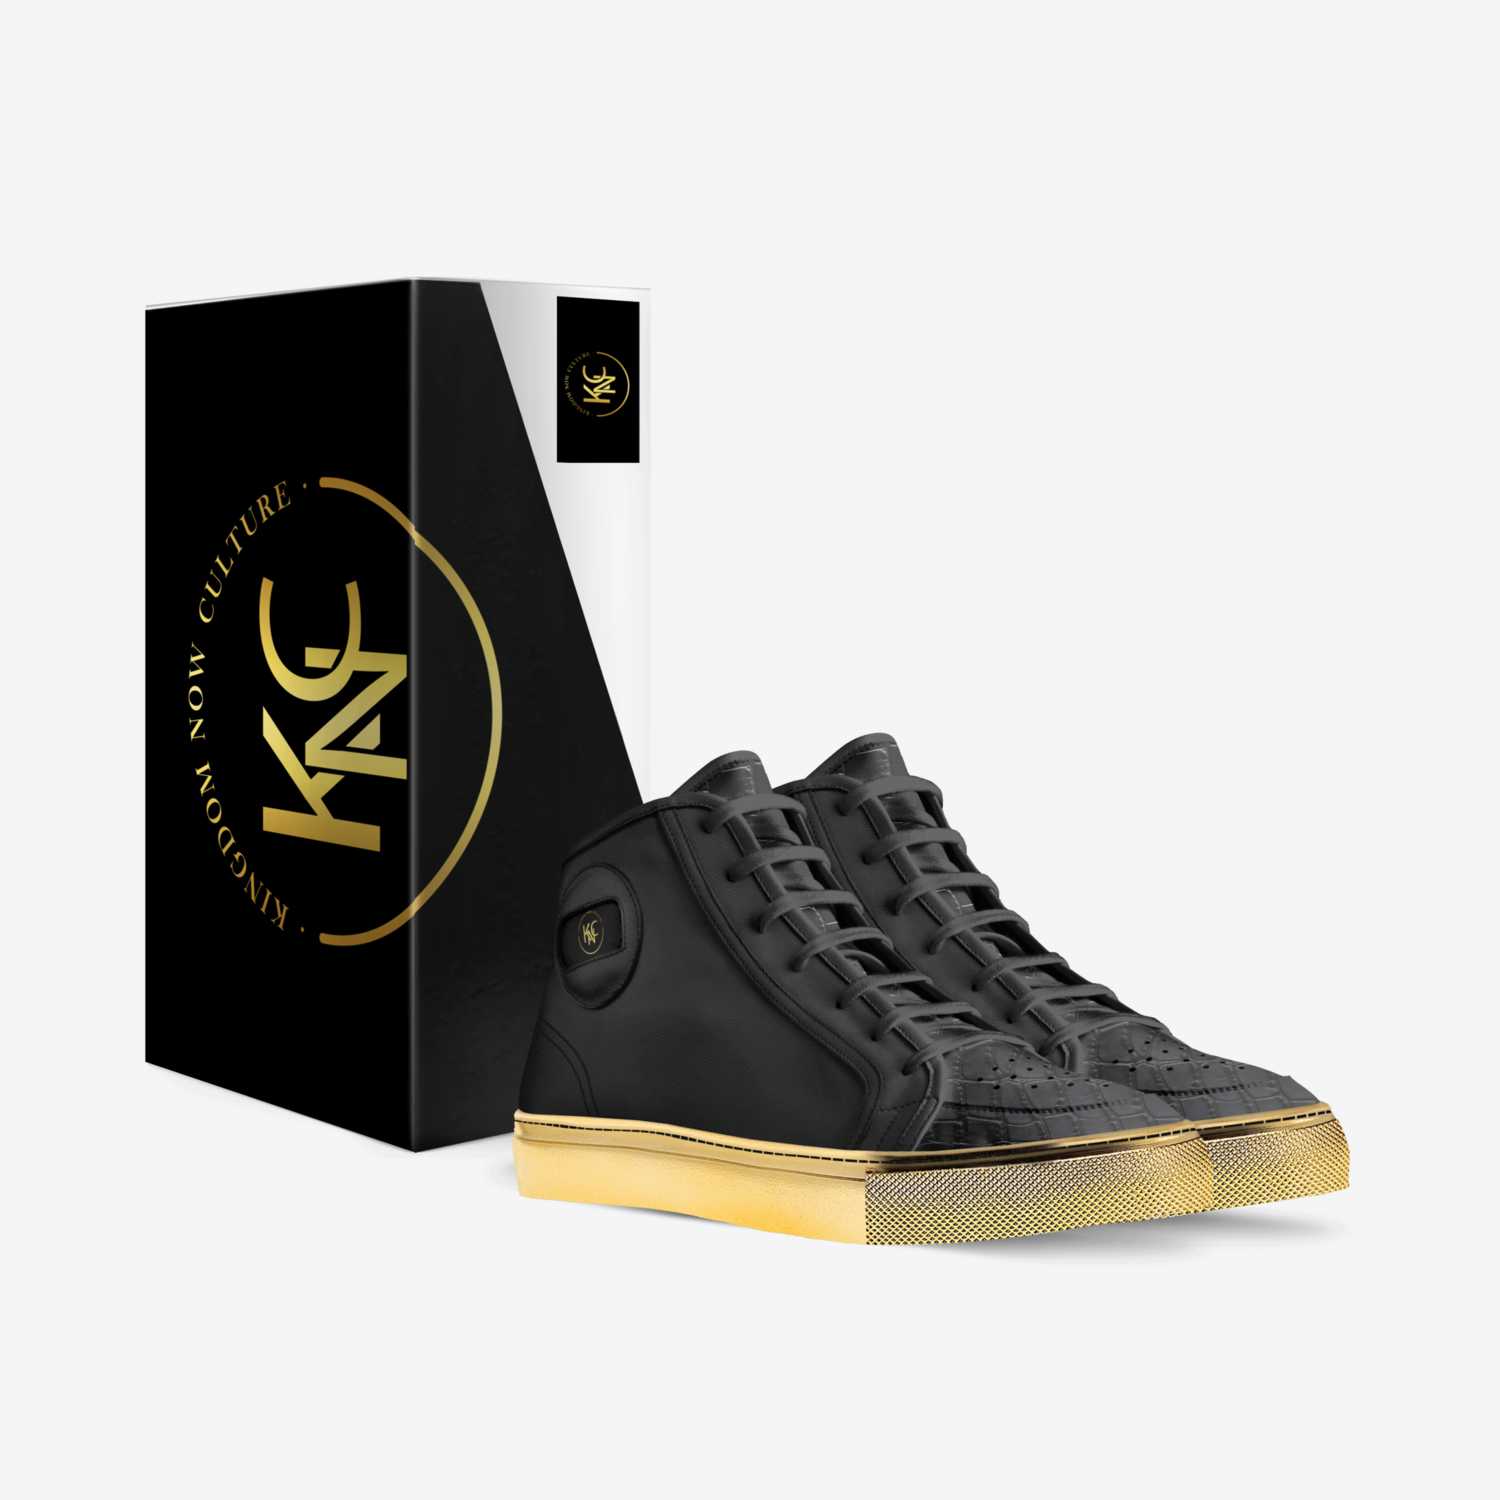 KNC custom made in Italy shoes by Roscoe Ezell | Box view